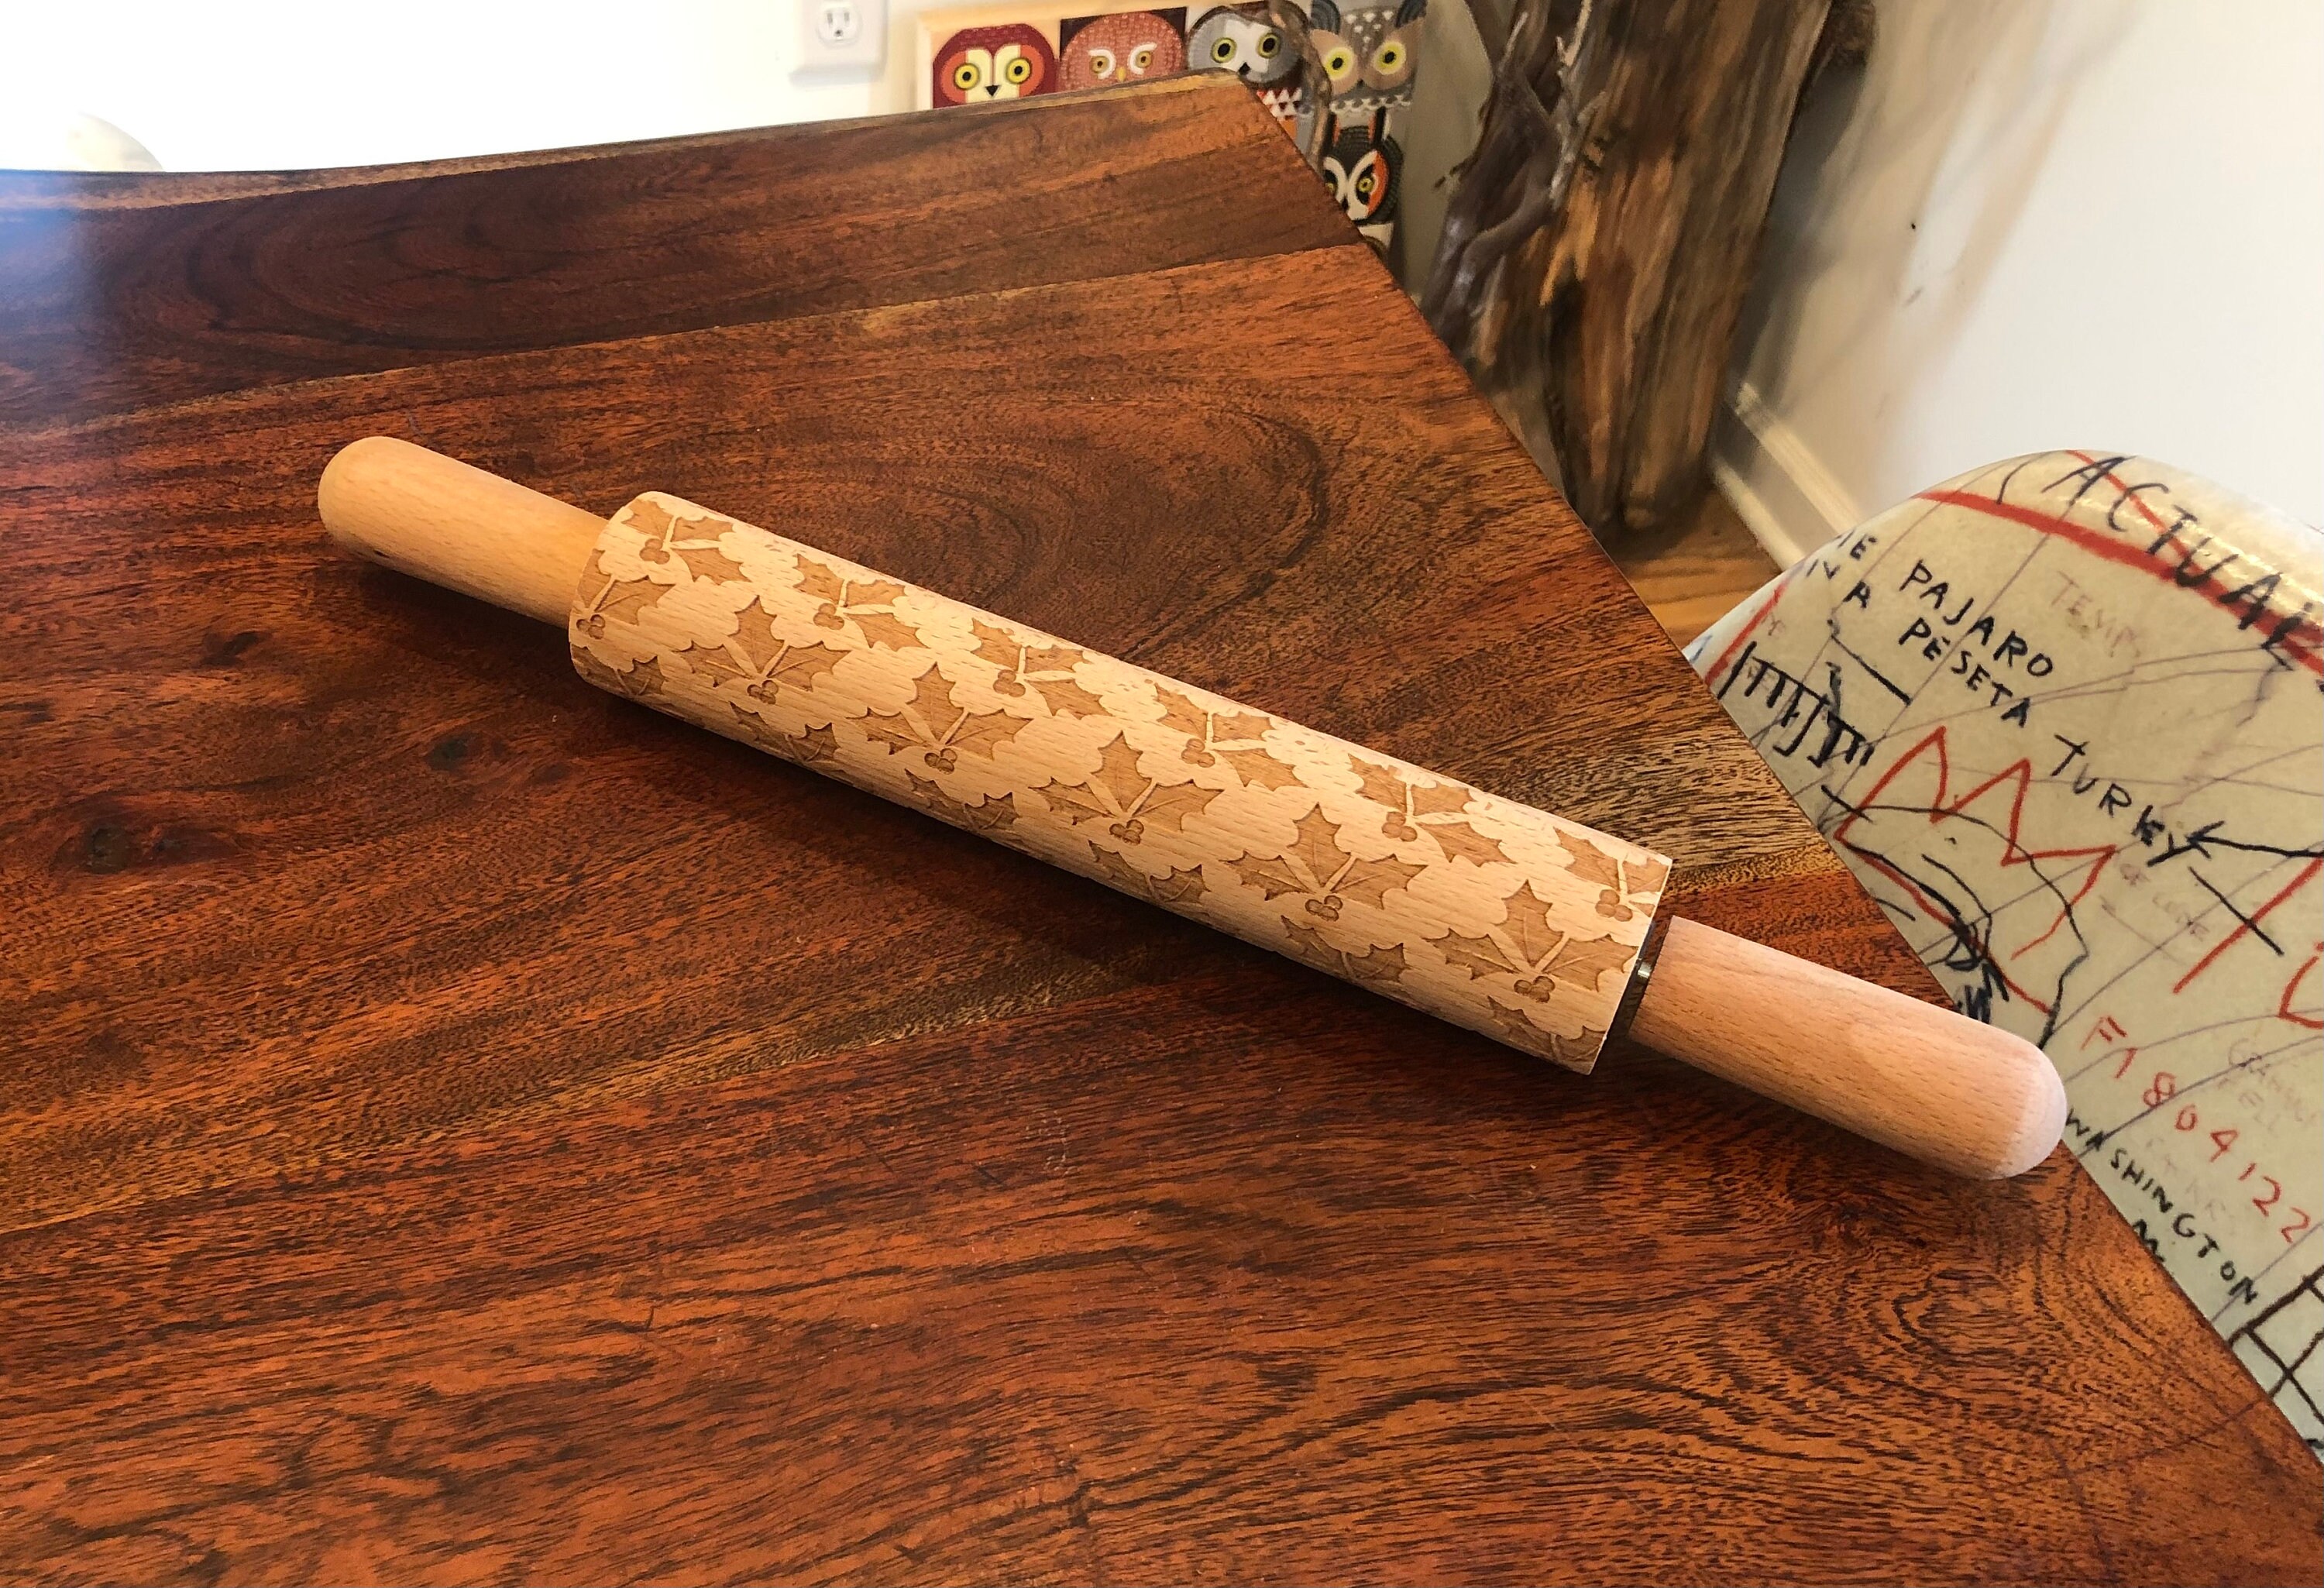 Tree Oak Maple Forest Rolling Pin Texture Embossed Engraved Wooden